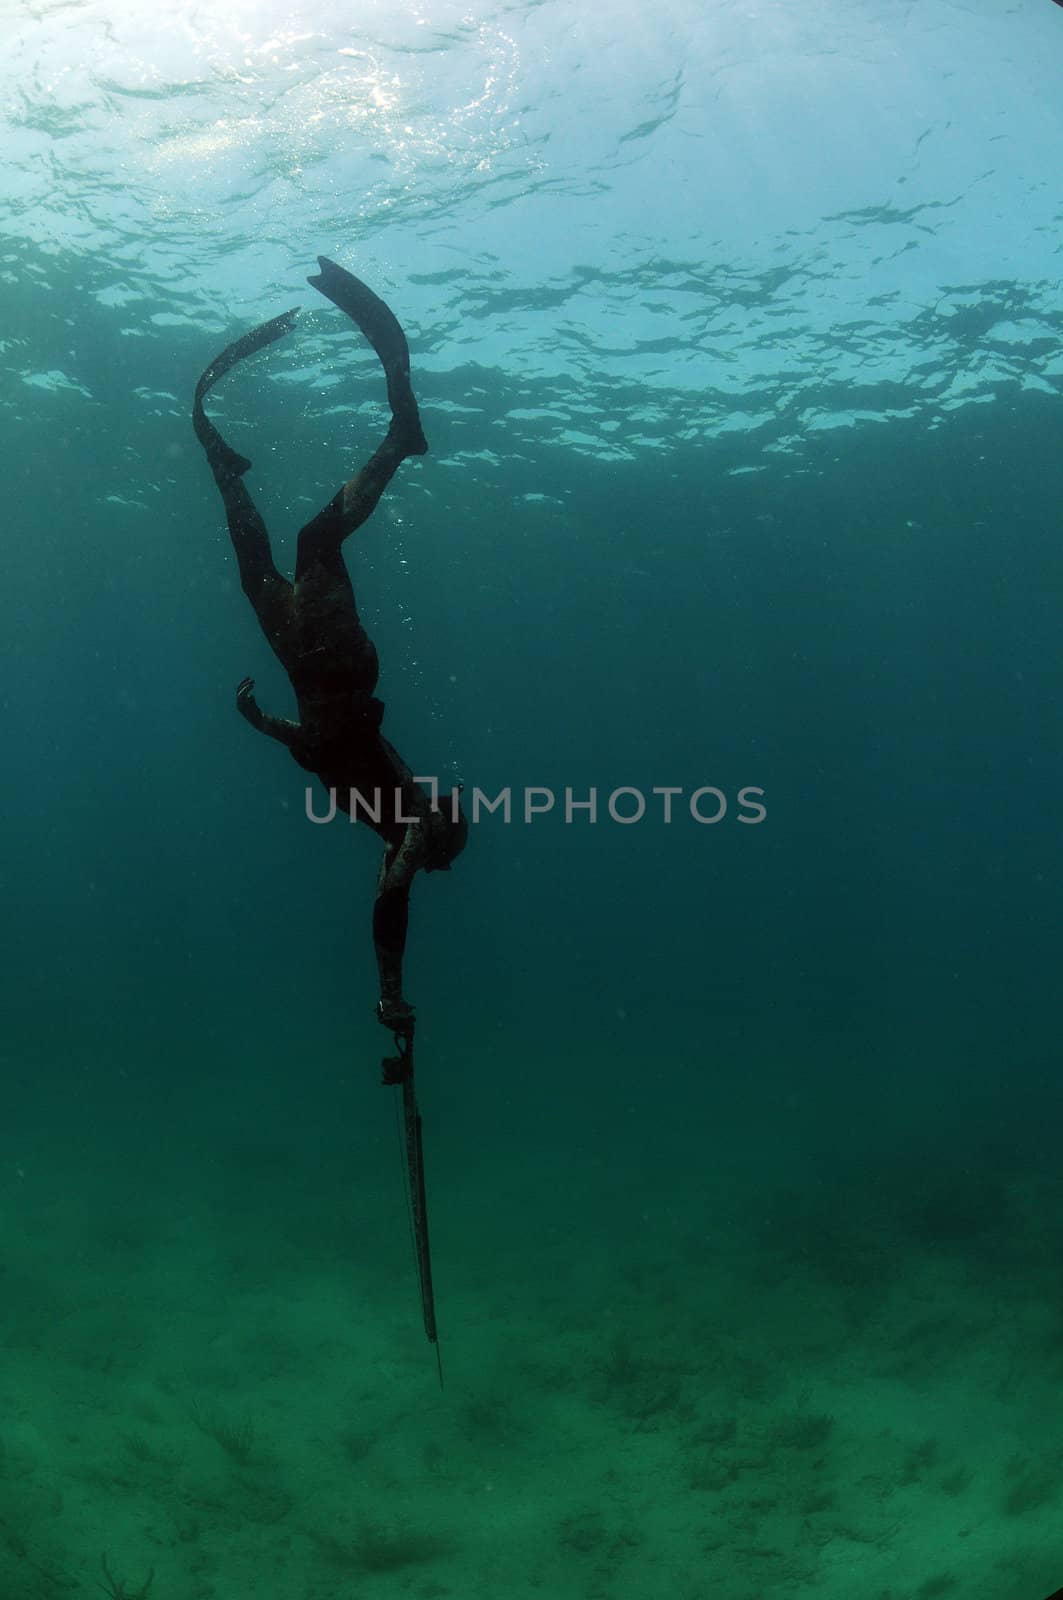 Man free diving with a spear gun in the ocean by ftlaudgirl